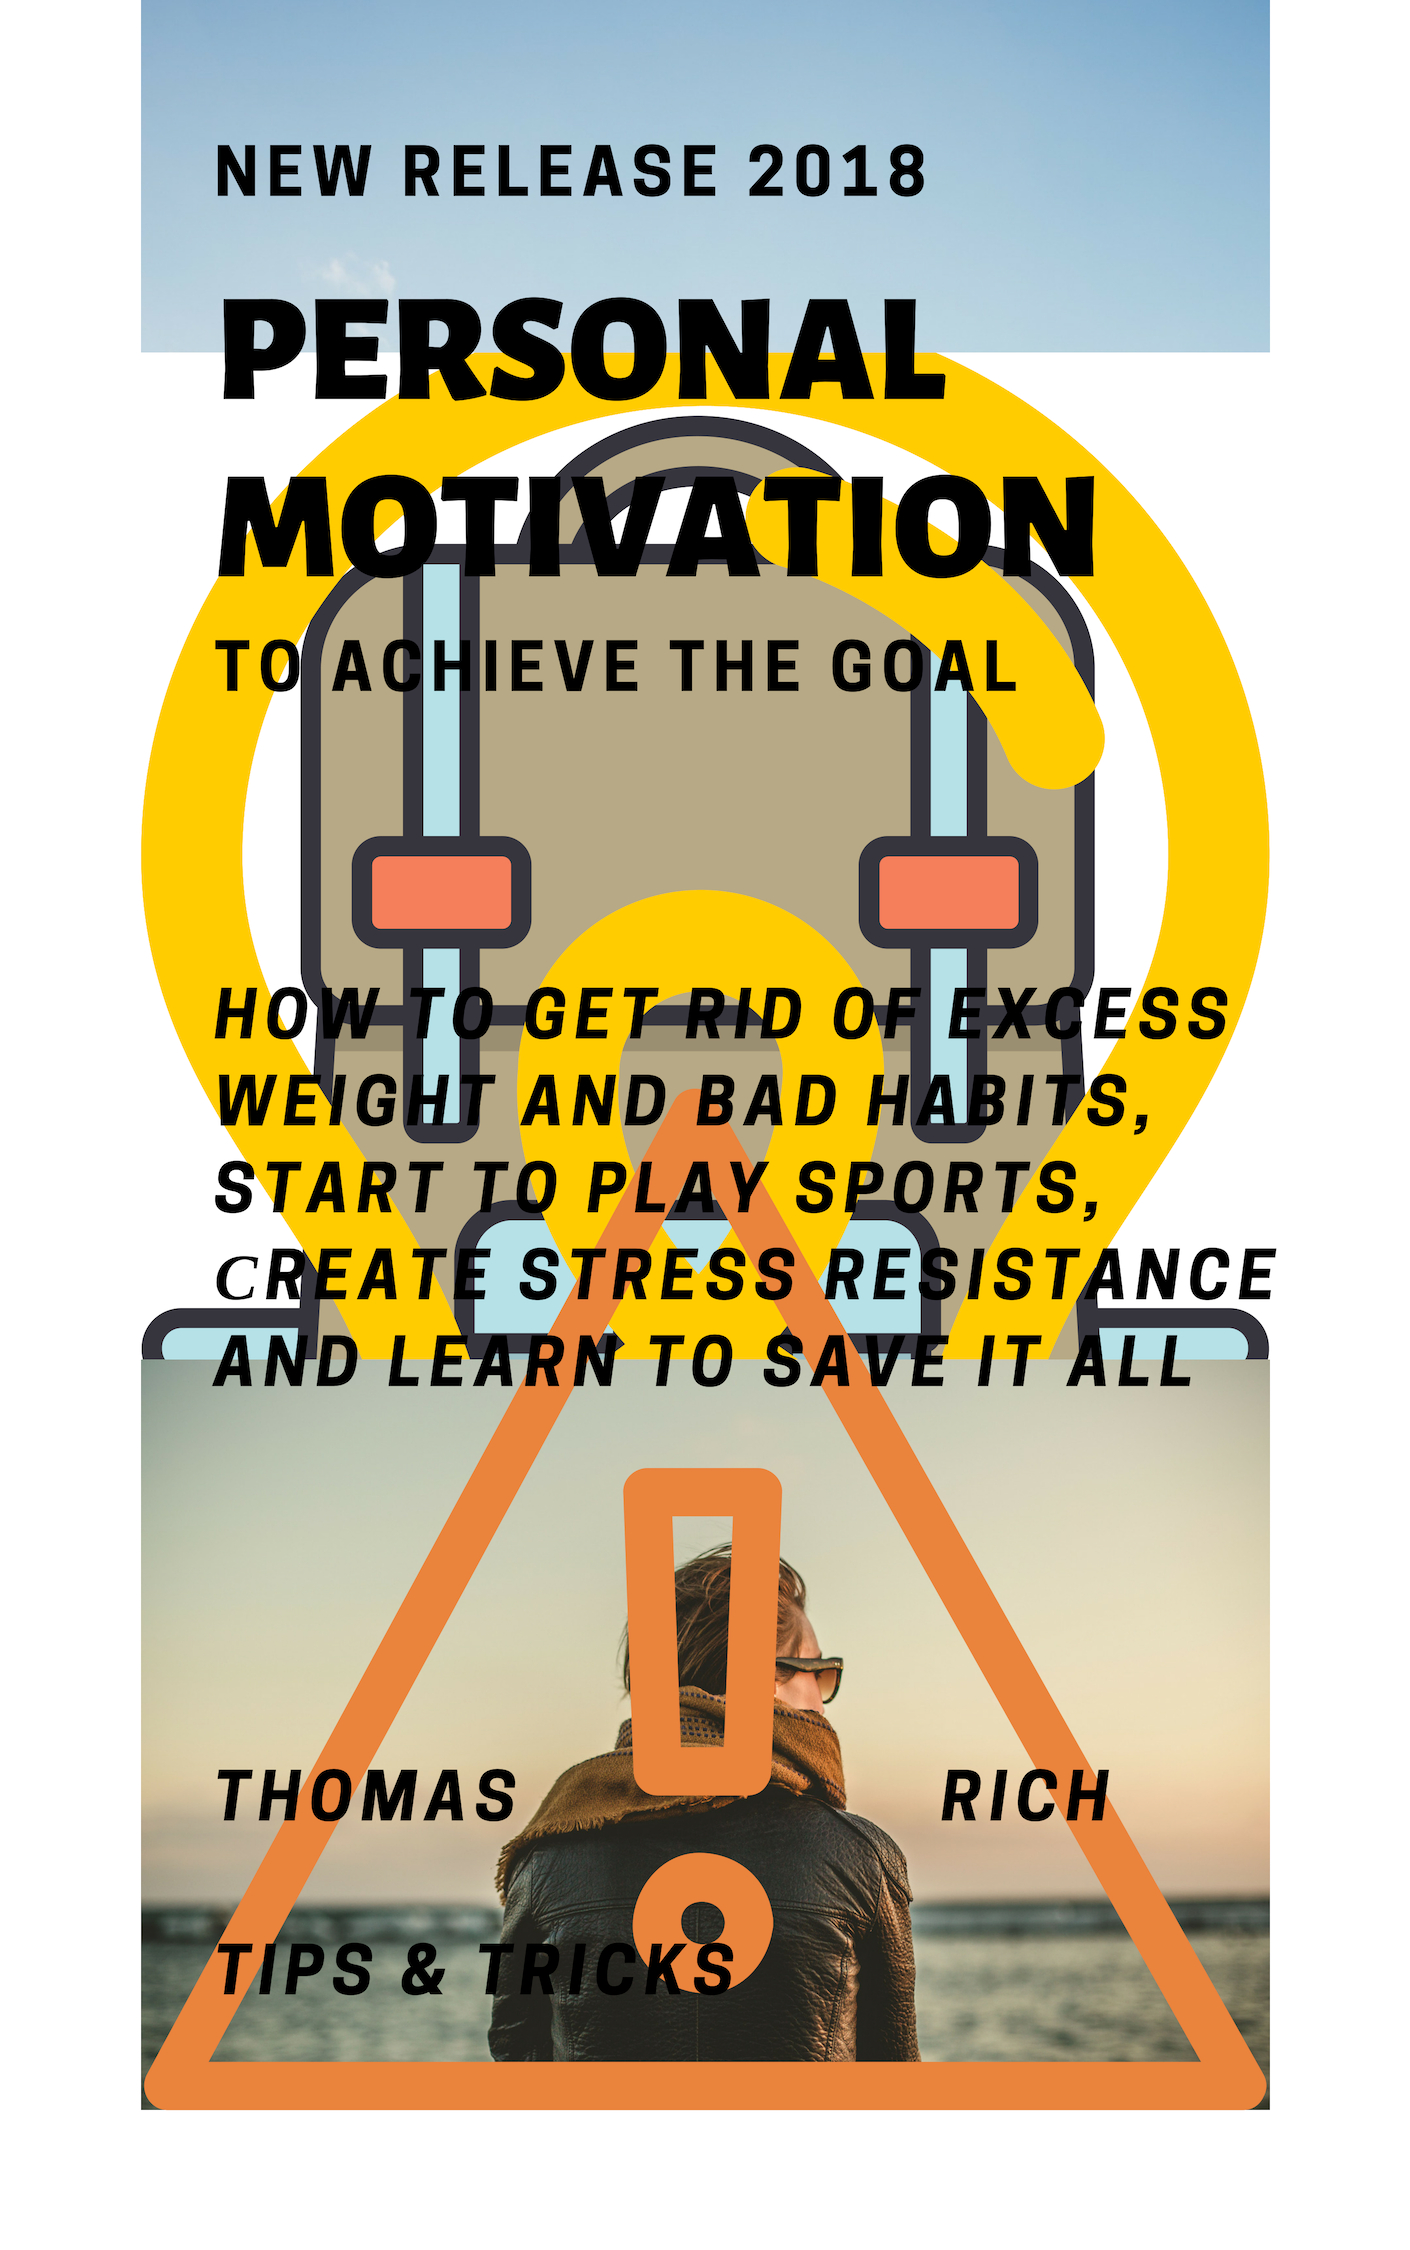 FREE: Personal motivation to achieve the goal by Thomas Rich